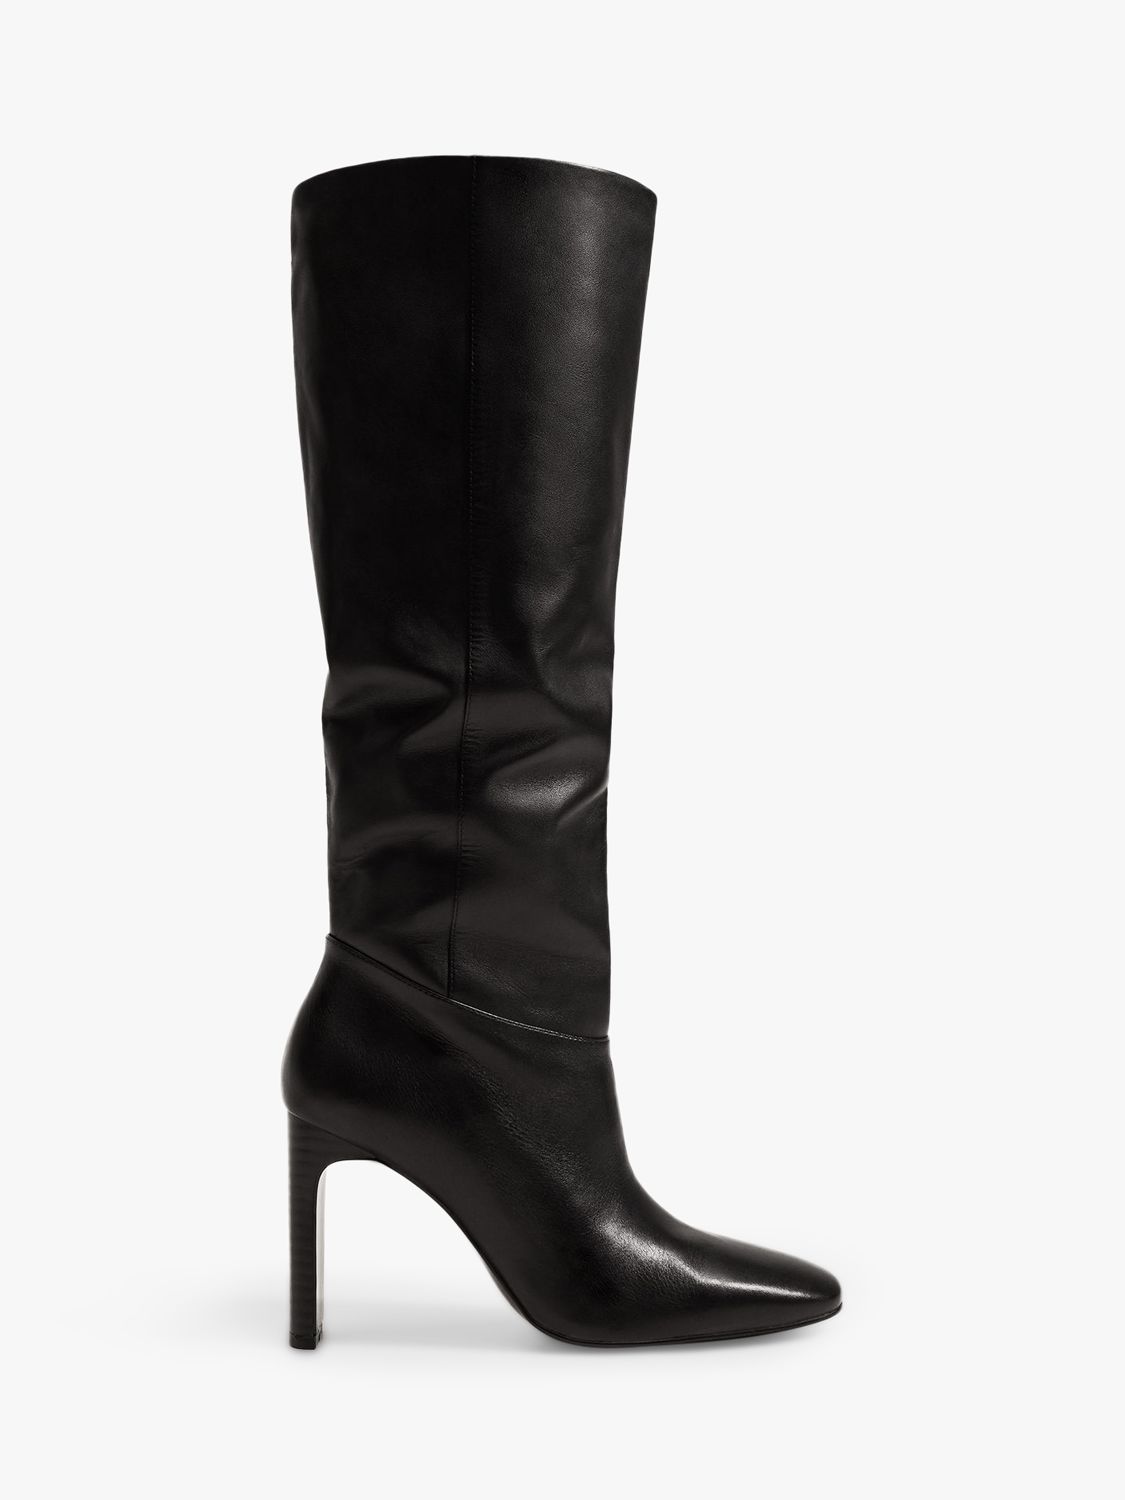 Mango Campo Leather Knee High Boots, Black at John Lewis & Partners